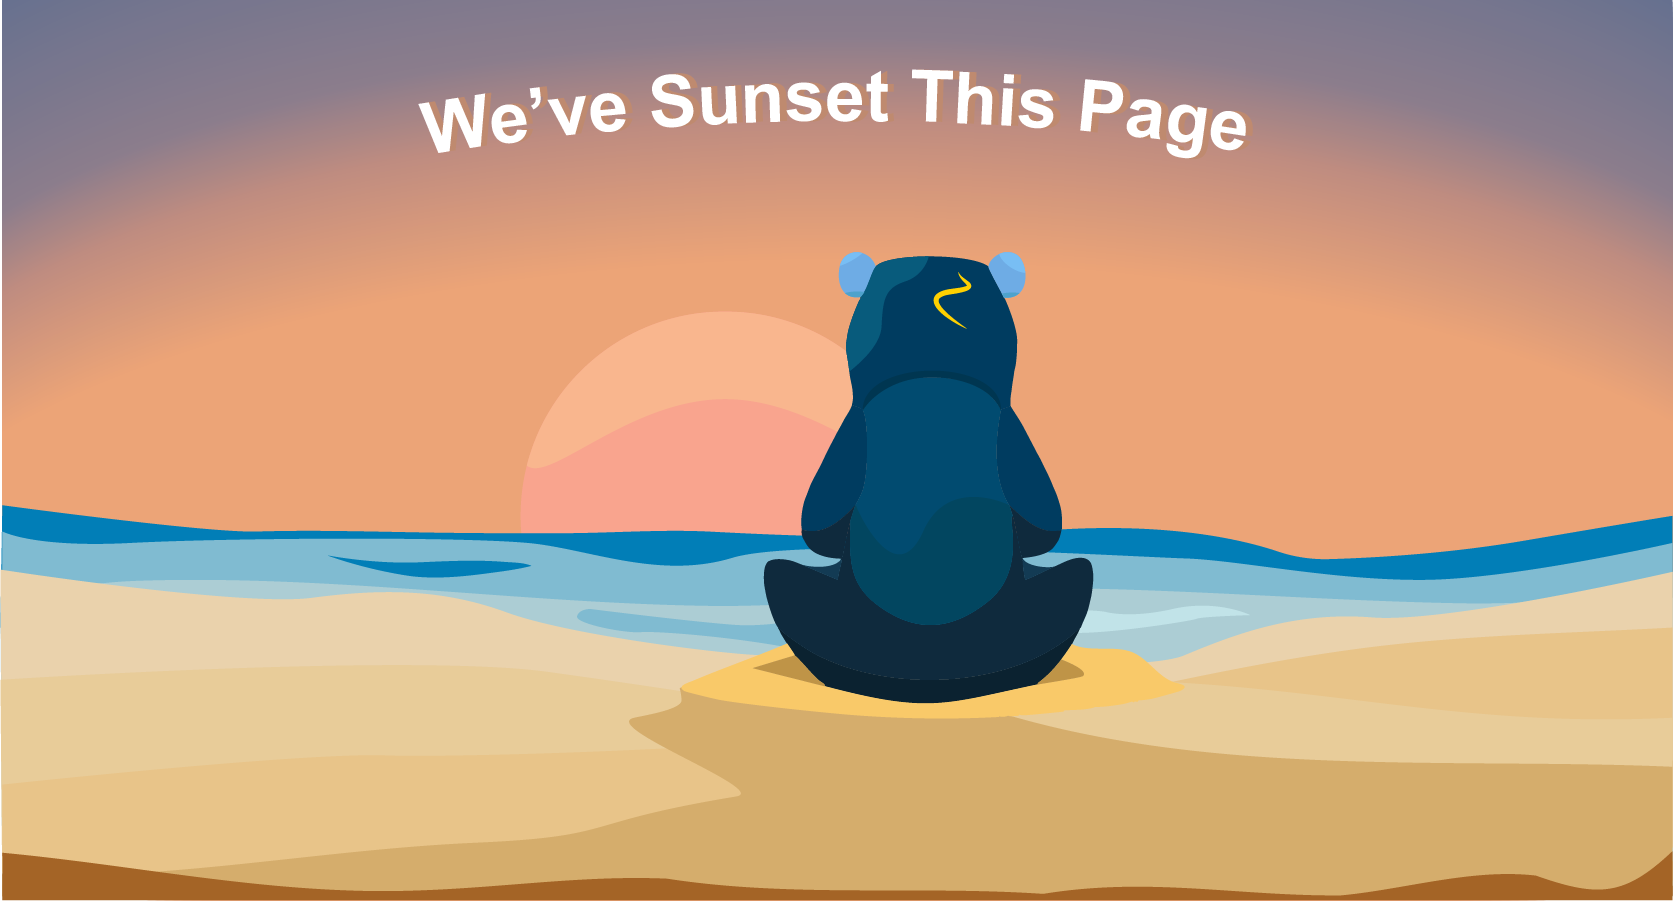 UCLA bear looking at the sunset across the ocean with the words "We've Sunset This Page" above the horizon.